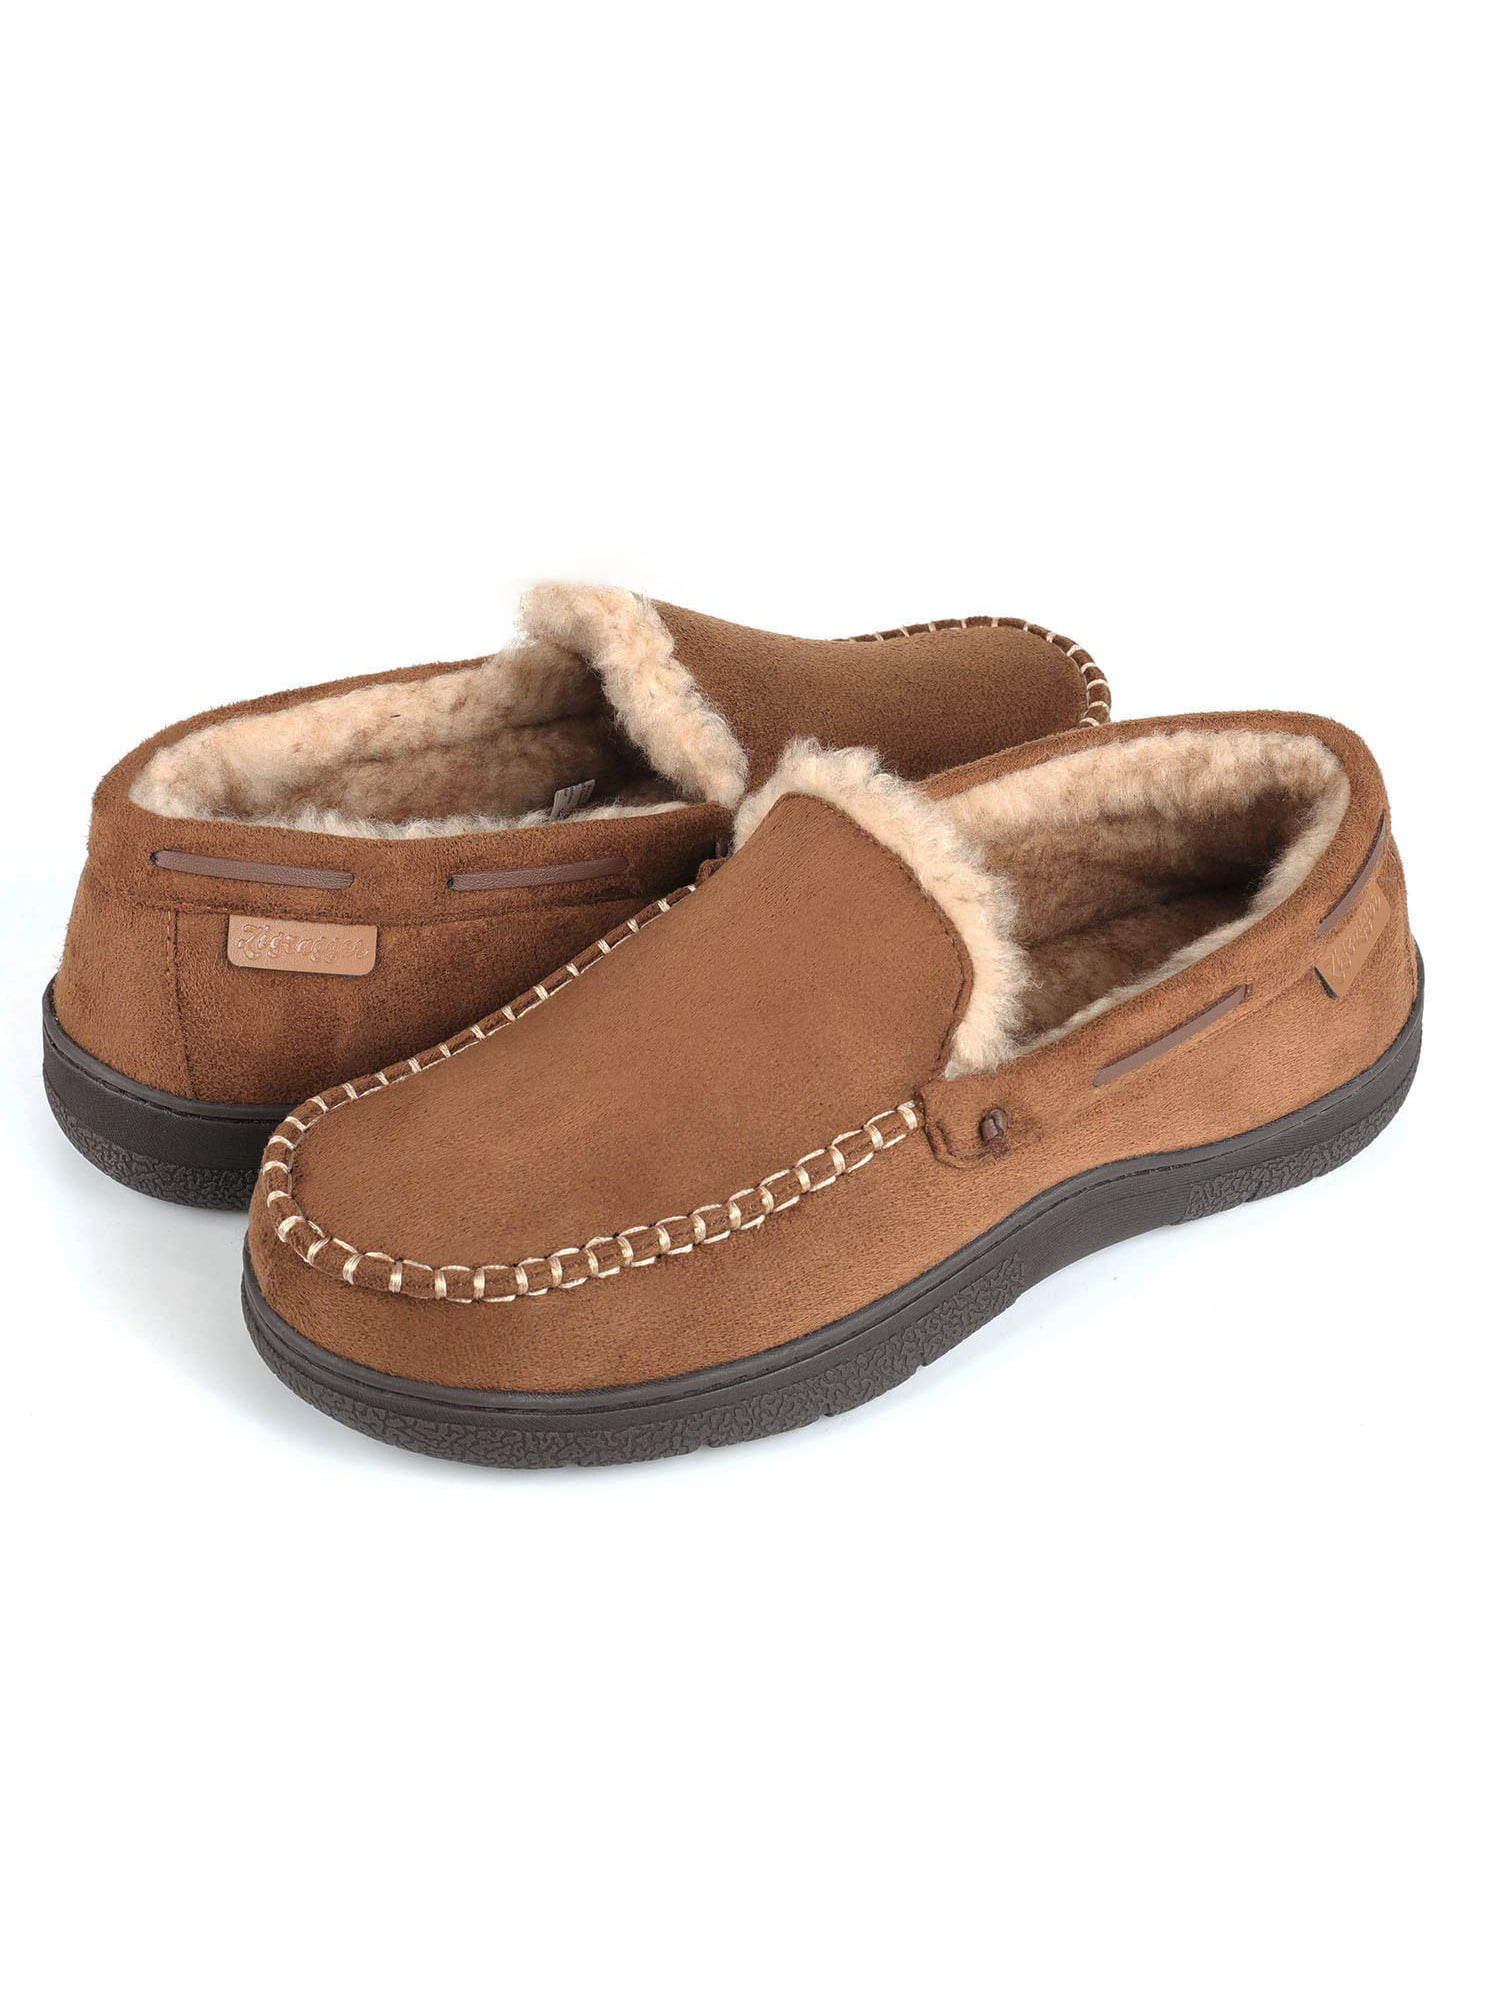 moccasin shoes walmart